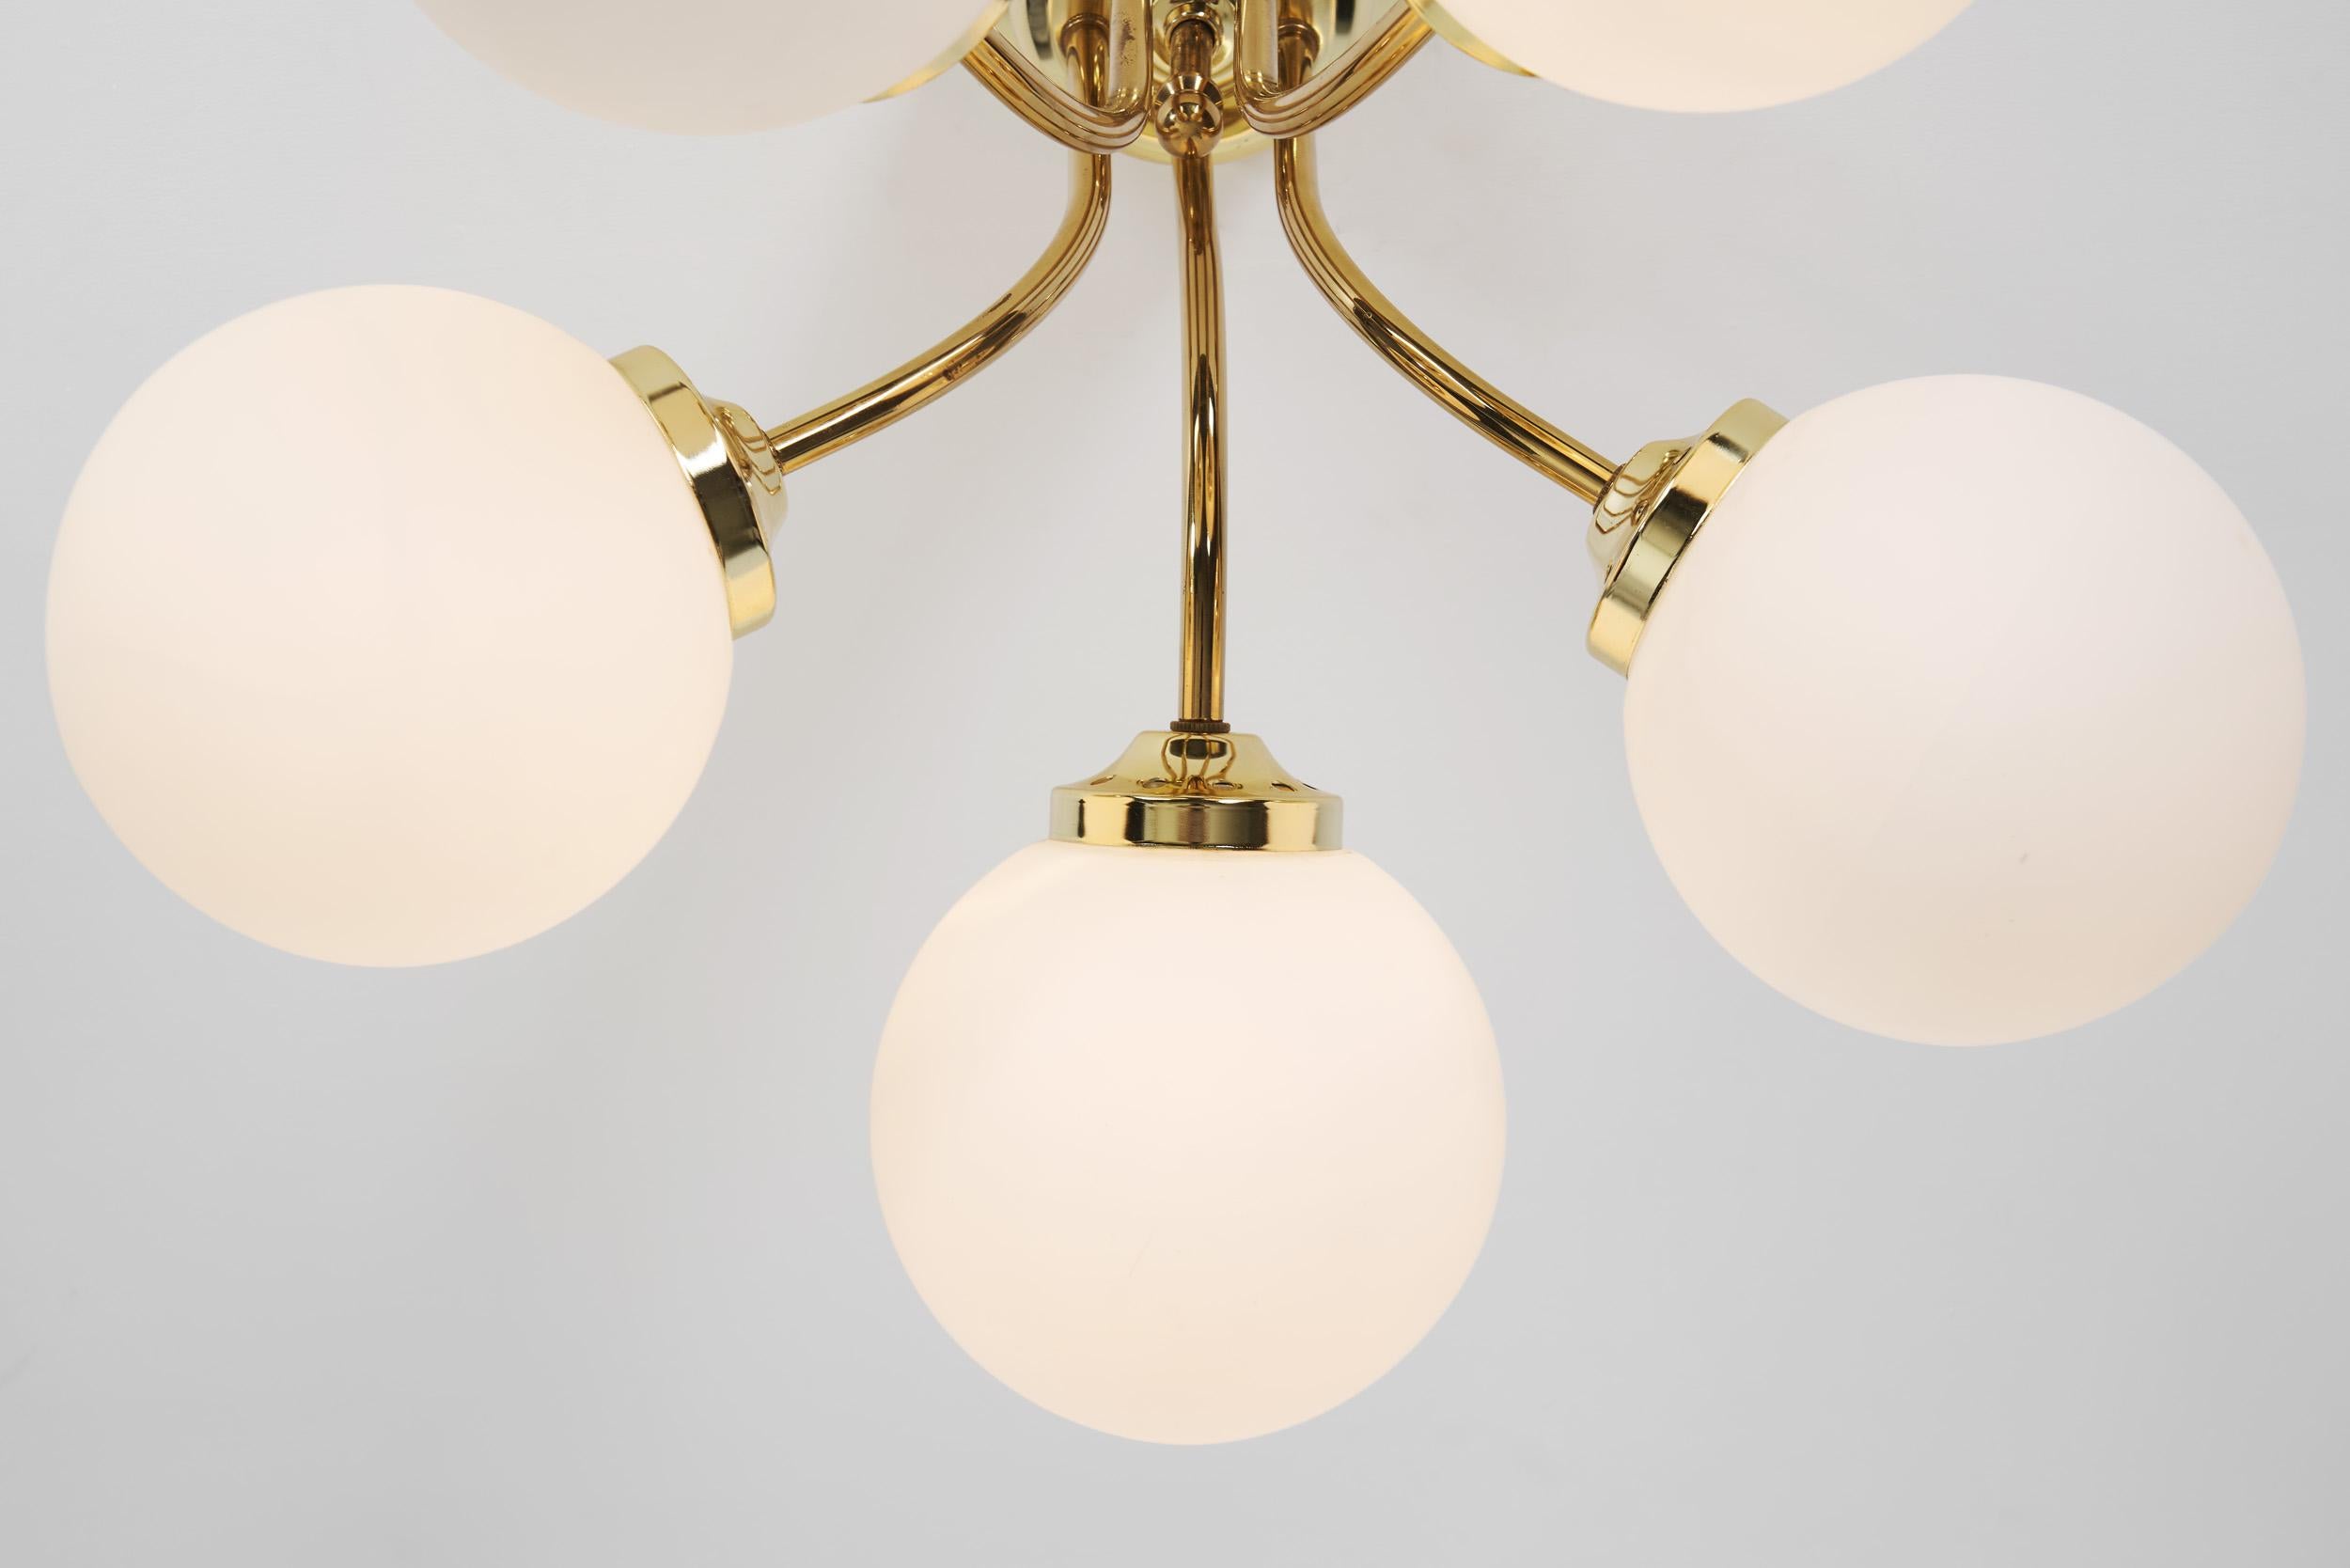 Hyval Five-Armed Brass and Glass Ceiling Lamp, Finland 1970s For Sale 4